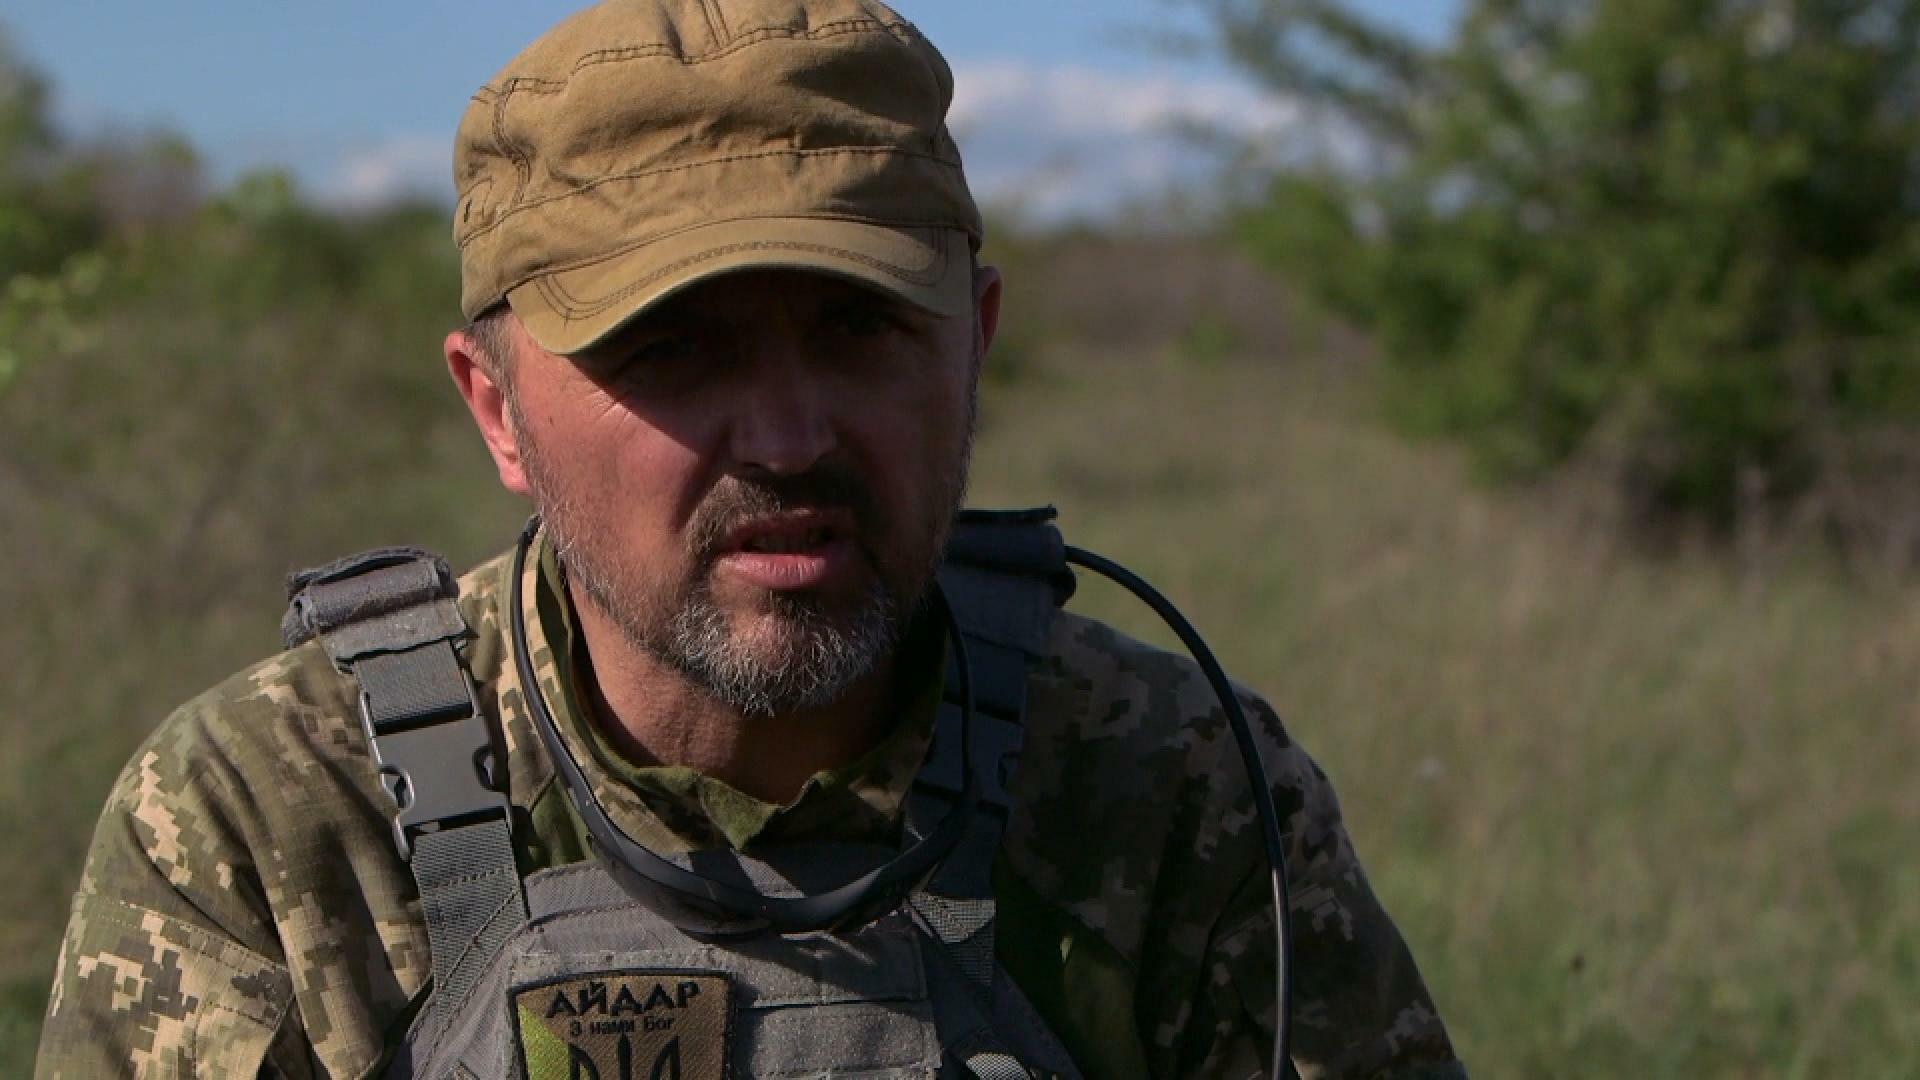 Watch CBS Mornings: Ukrainian general pleads for more weapons - Full ...